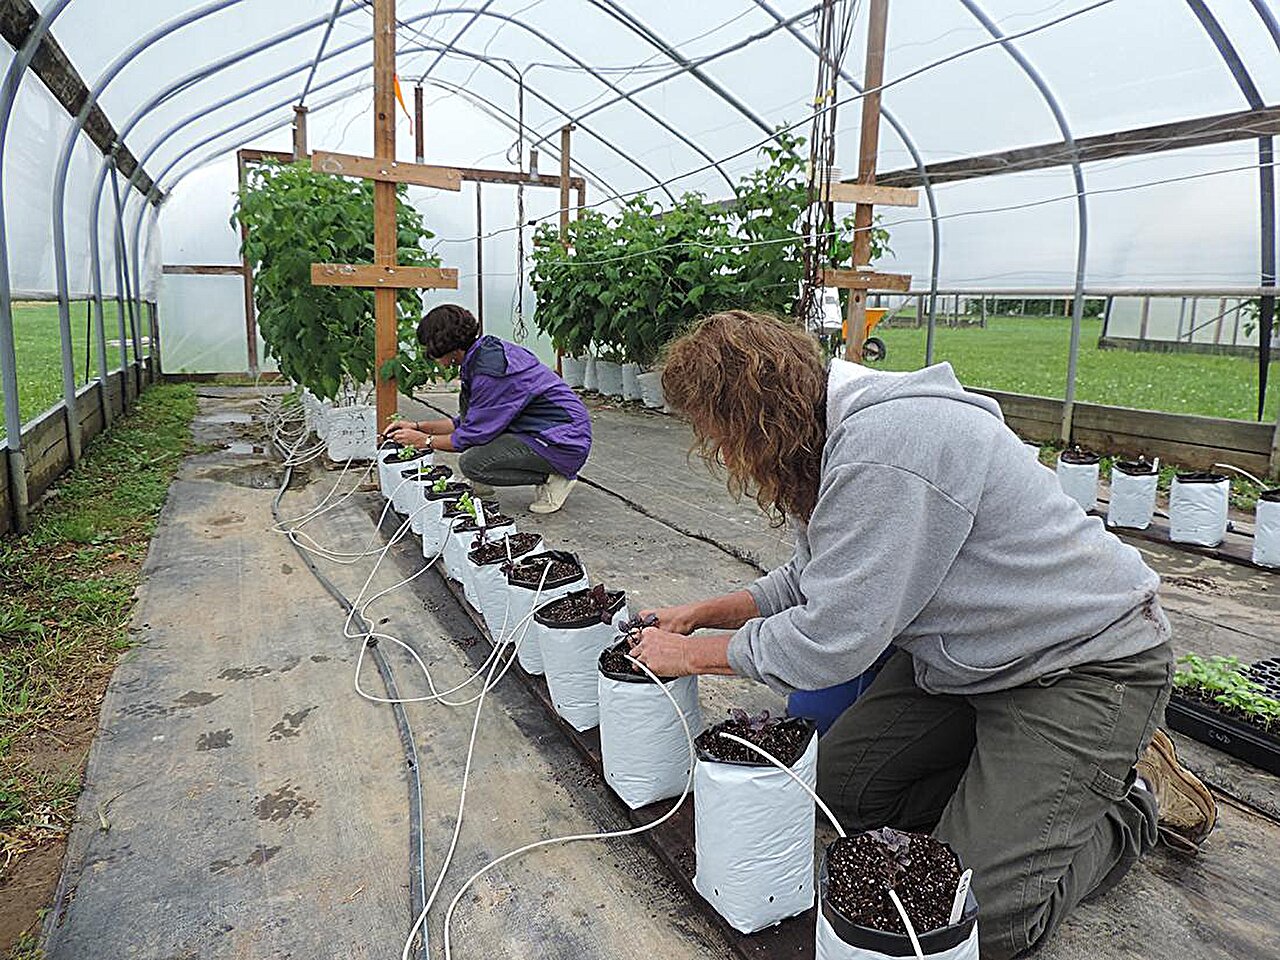 Type of plastic film on high tunnels can filter sunlight, influence plant growth